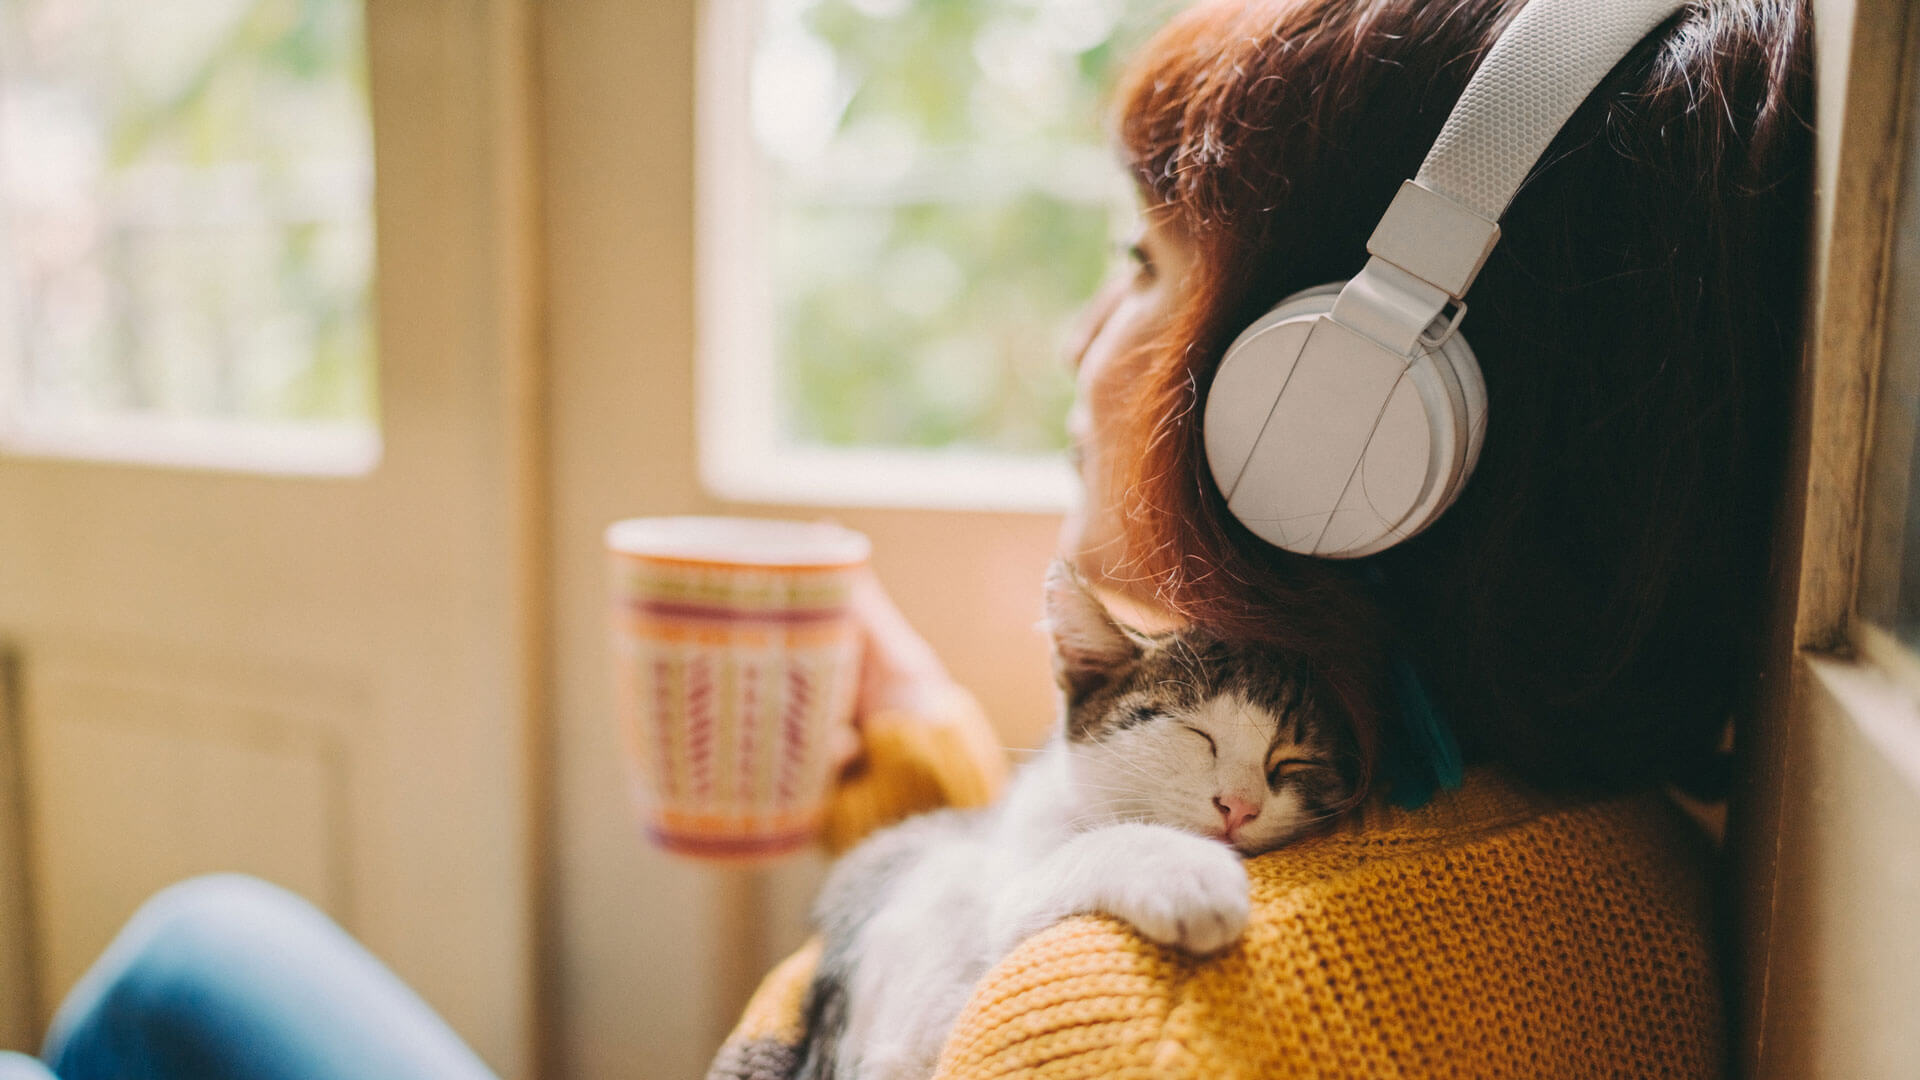 person listening to music with headphones